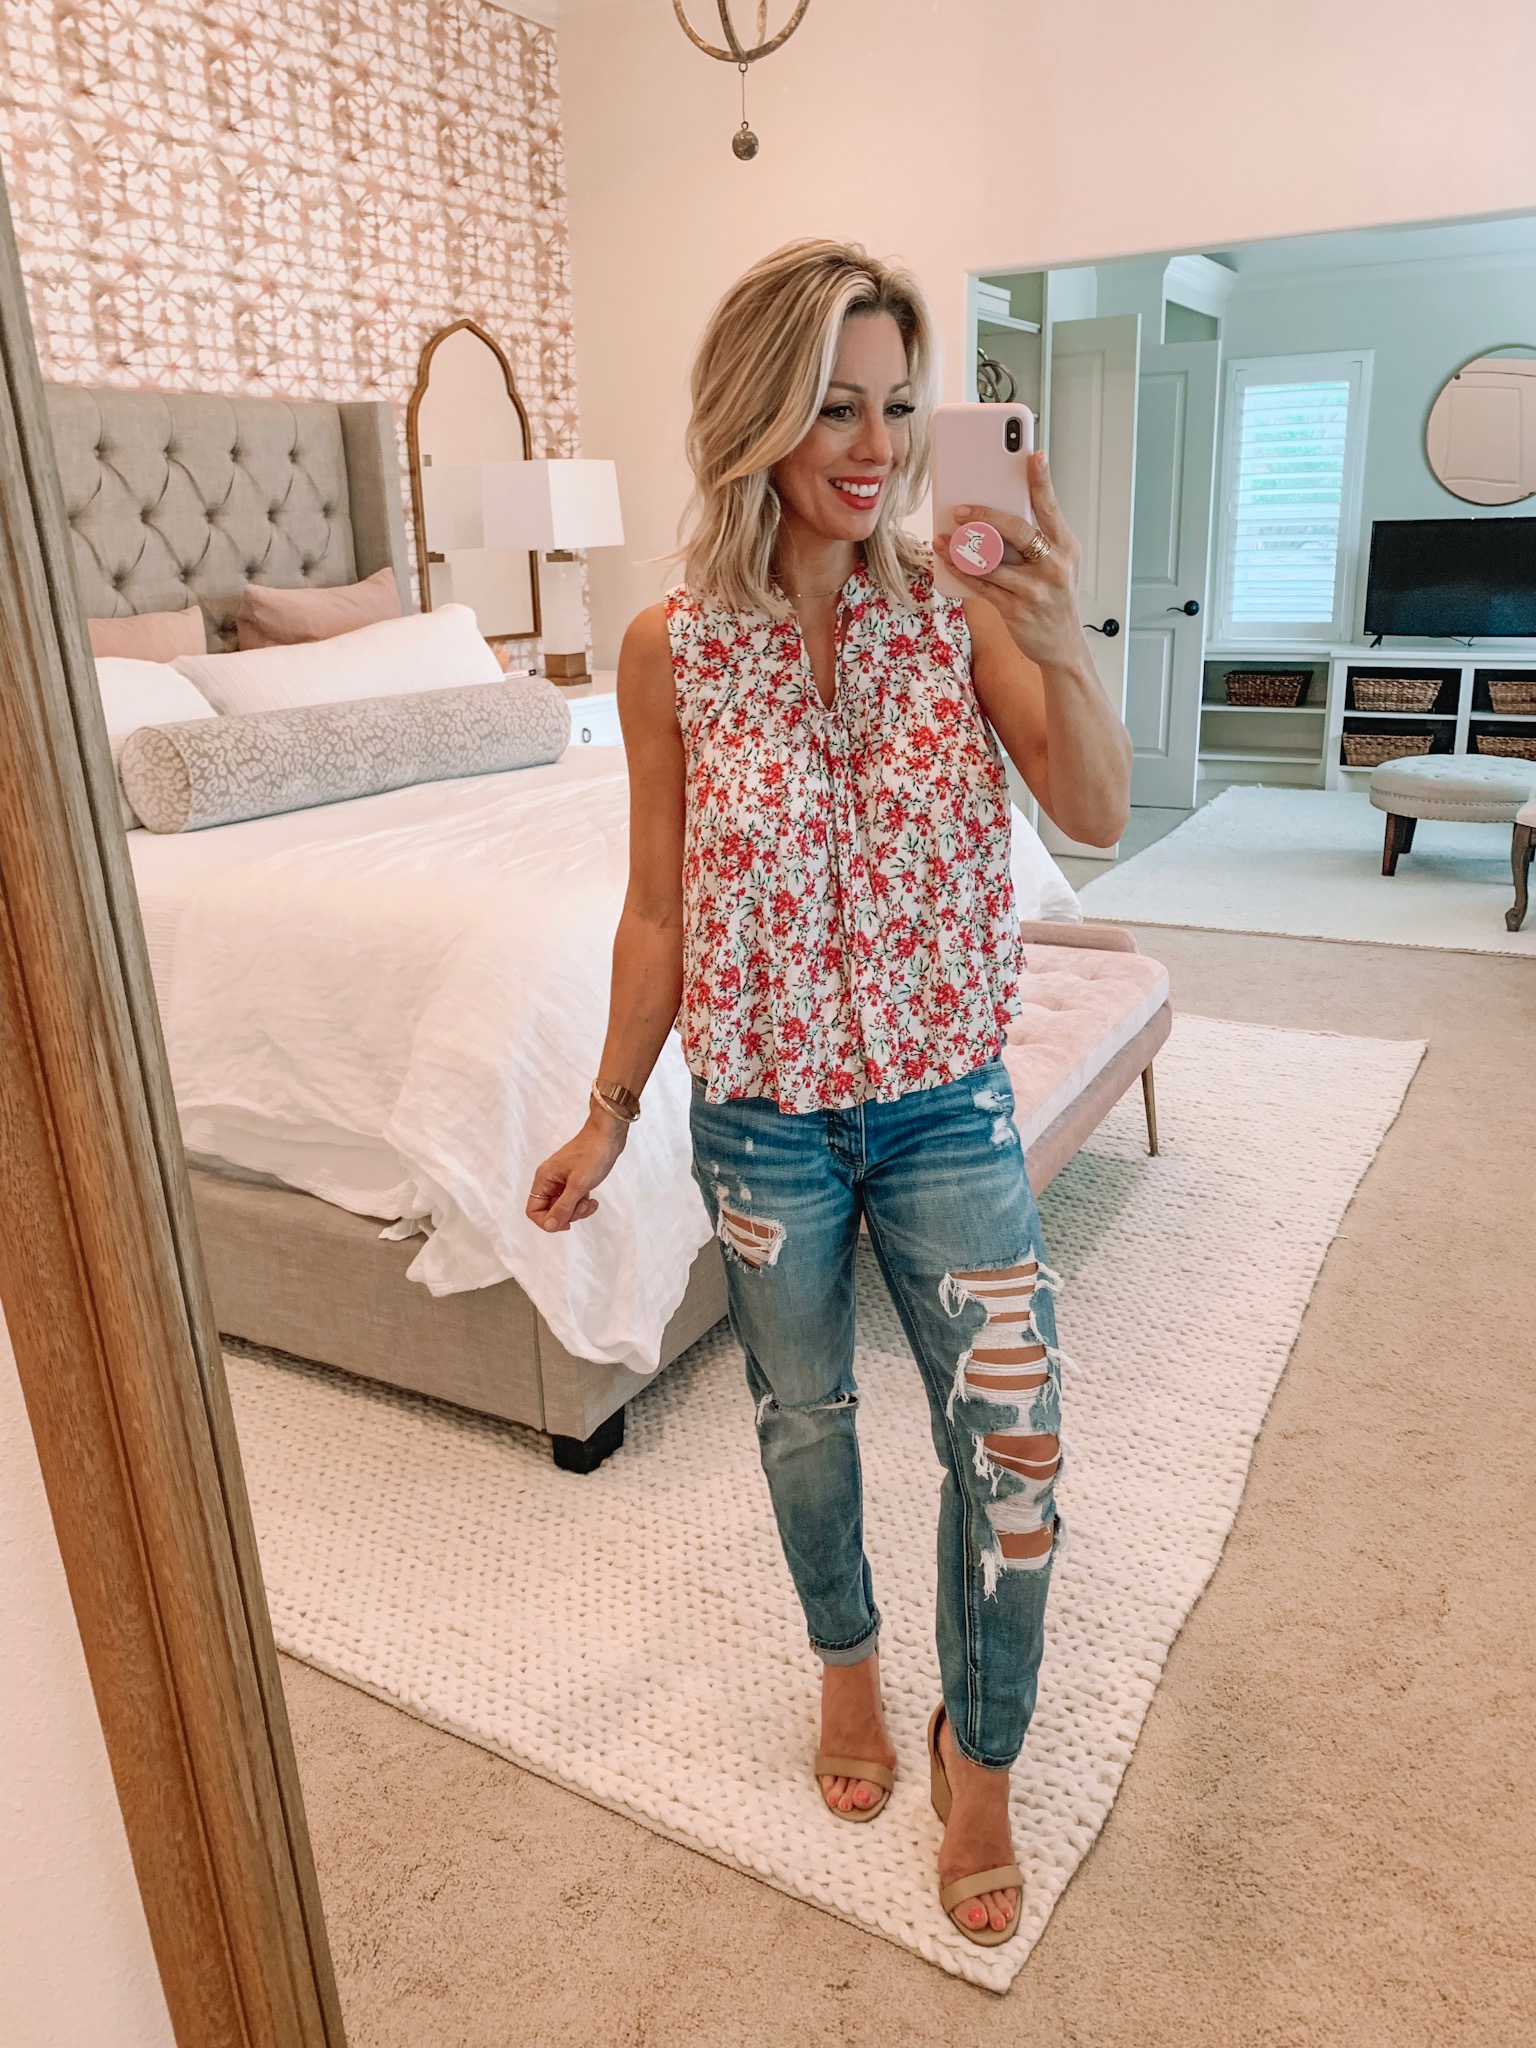 Floral top and ripped jeans with wedges